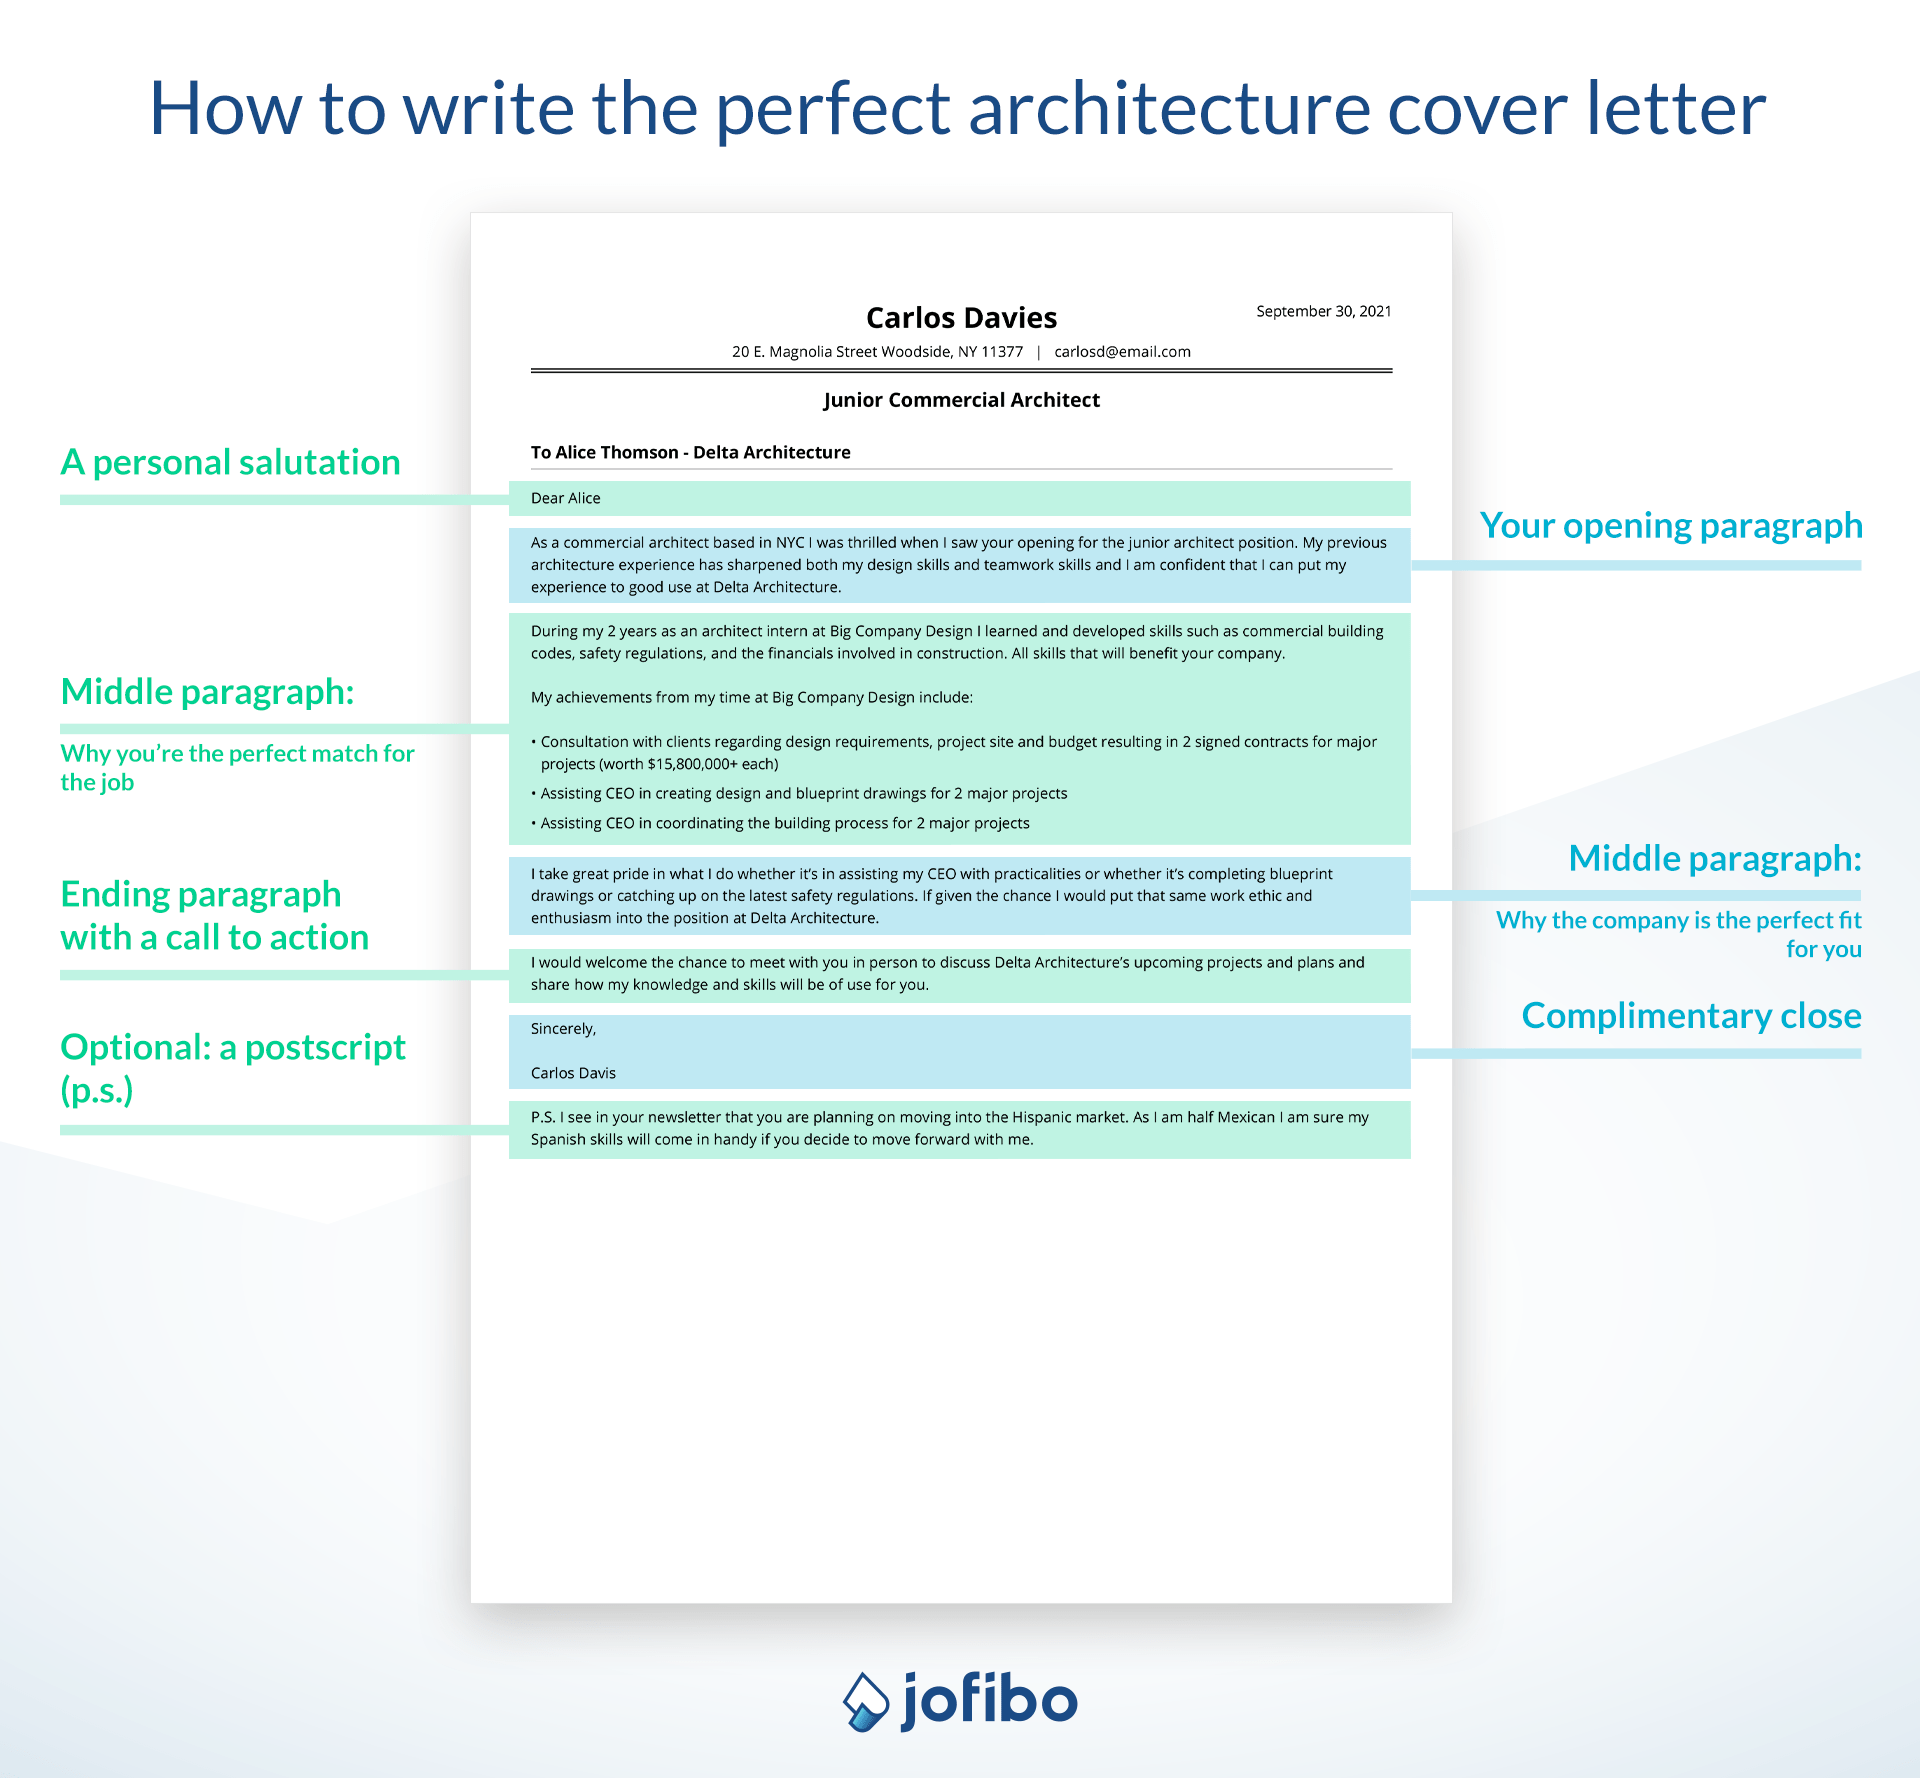 Breakdown of how to write the perfect architecture cover letter